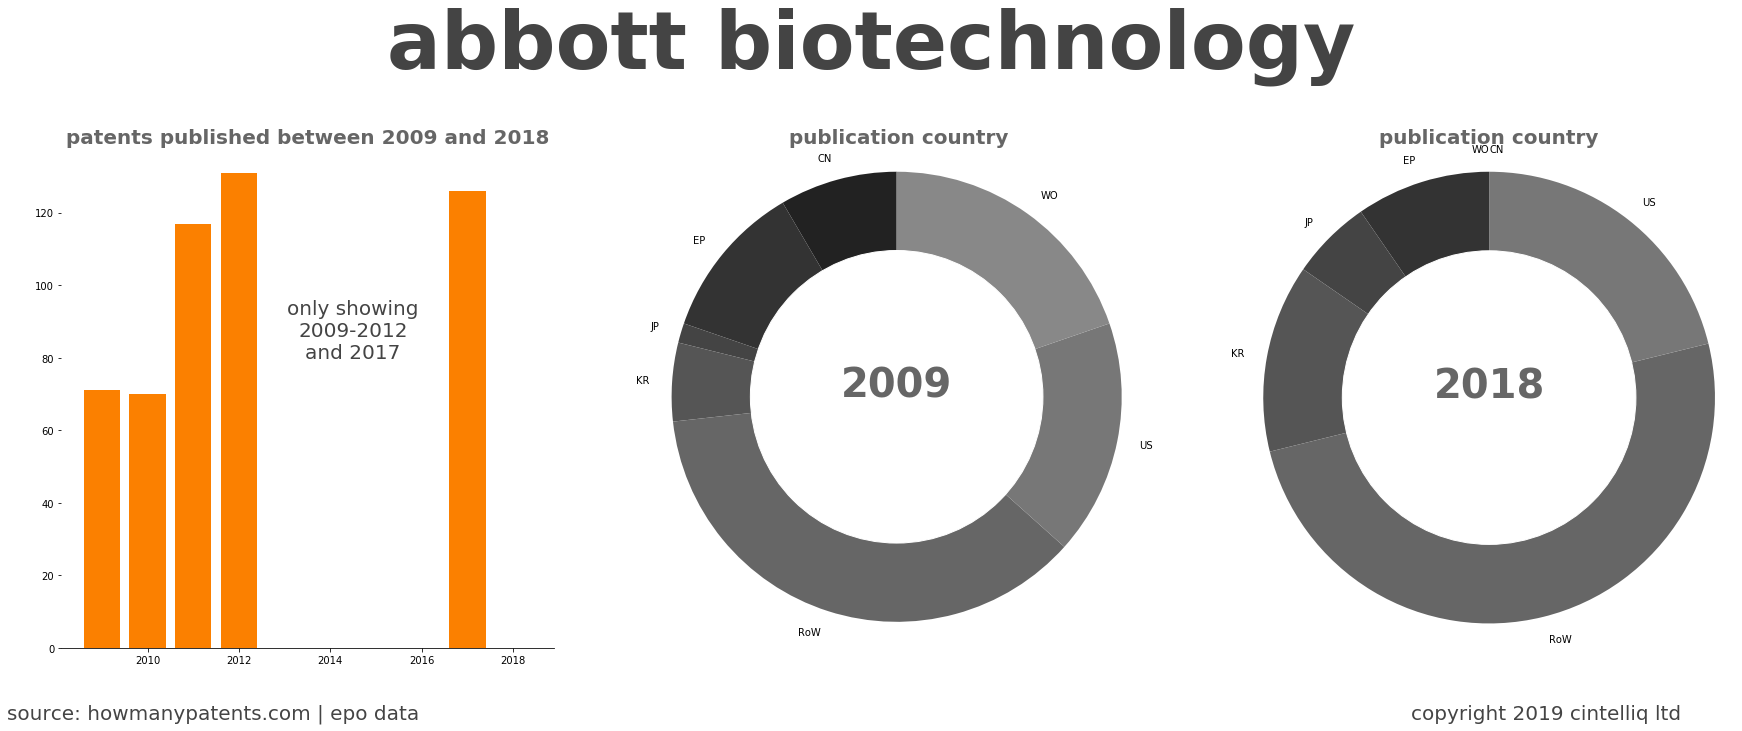 summary of patents for Abbott Biotechnology